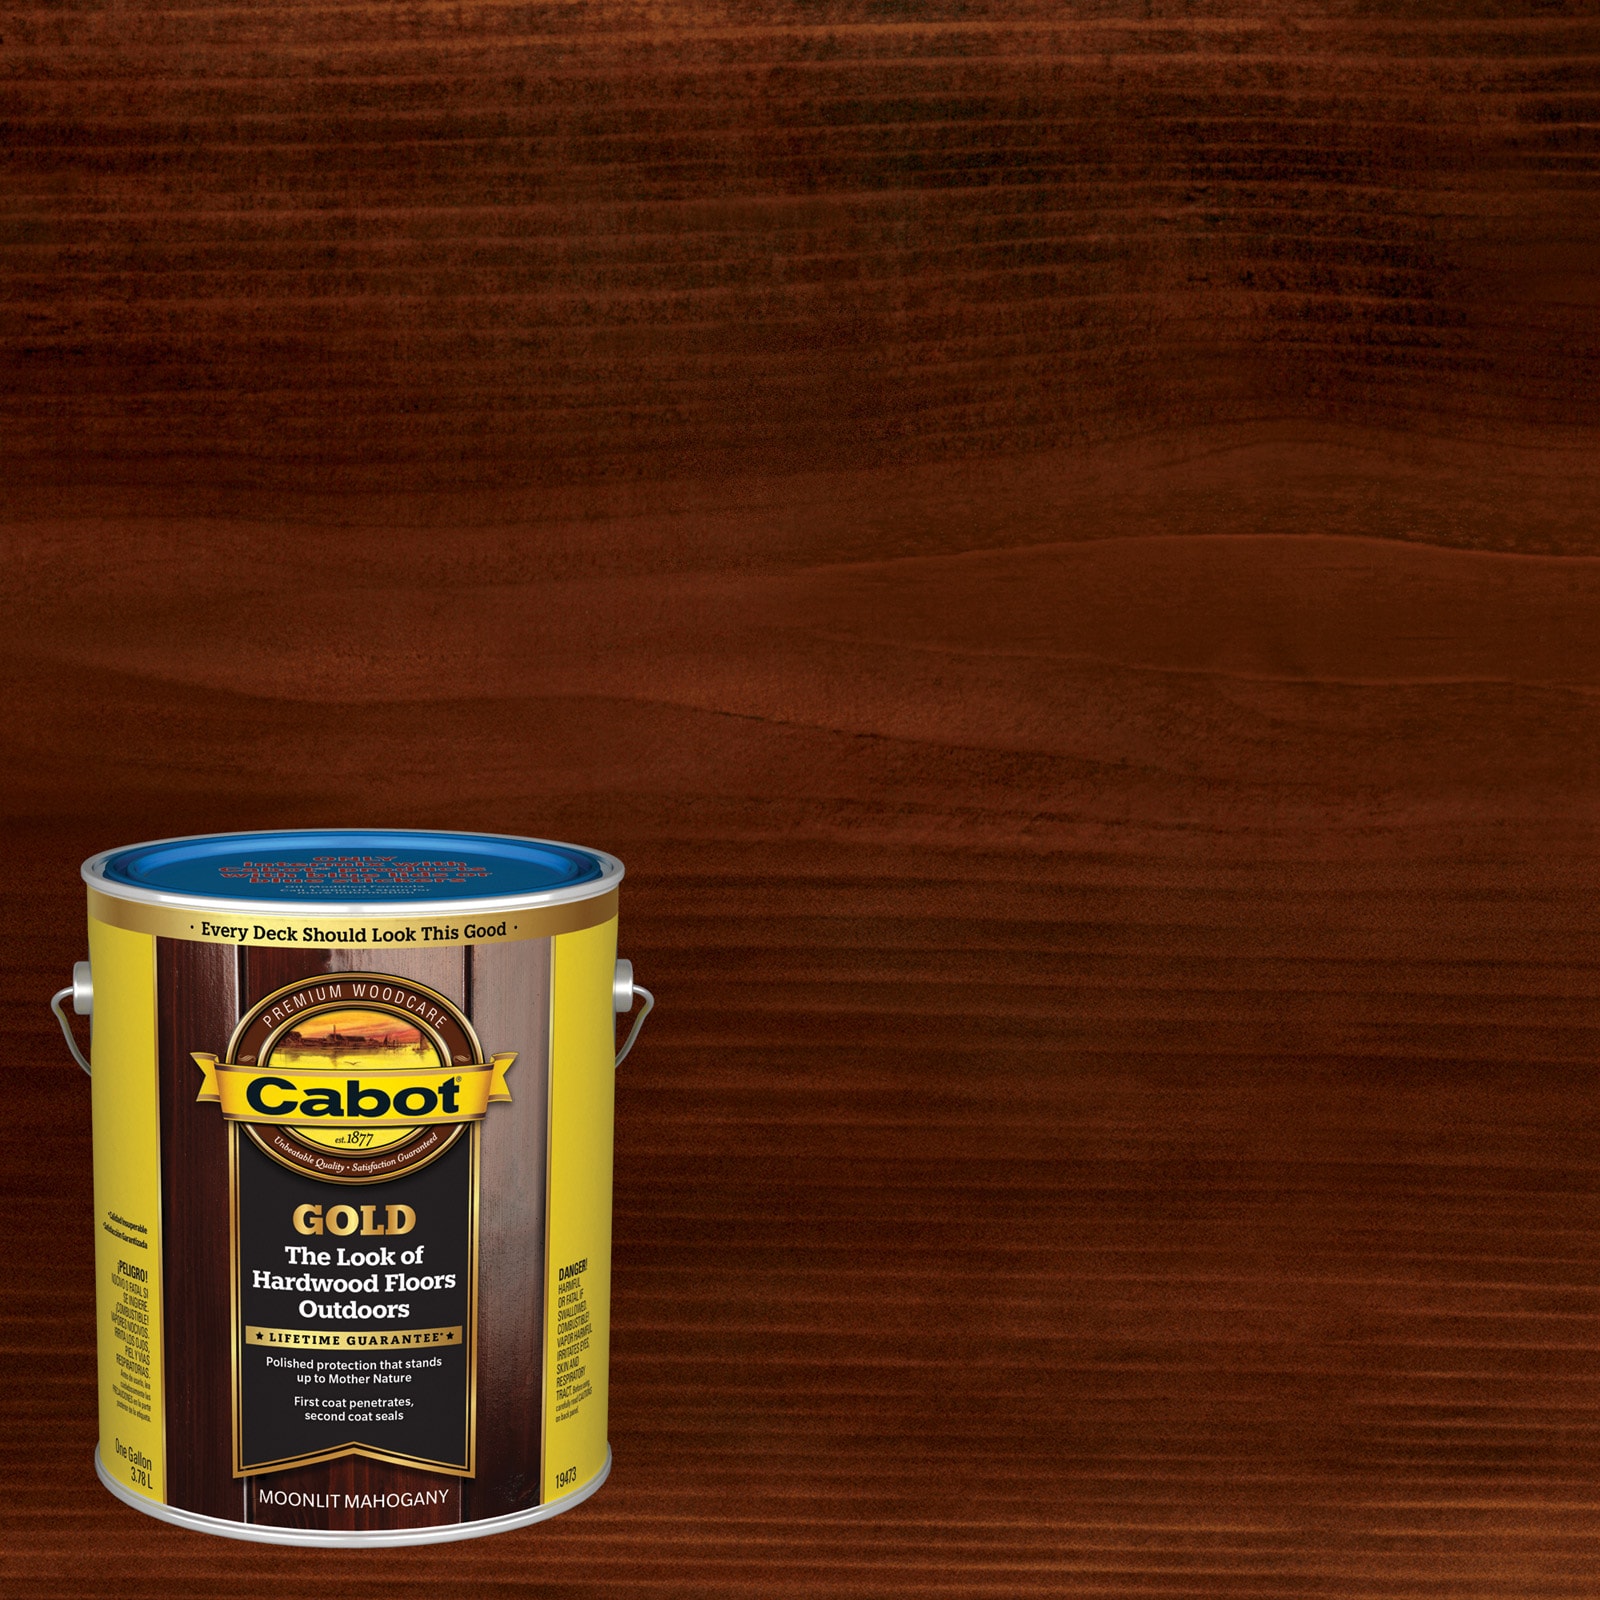 Cabot Evergreen Semi-transparent Exterior Wood Stain and Sealer (1-Gallon)  in the Exterior Stains department at